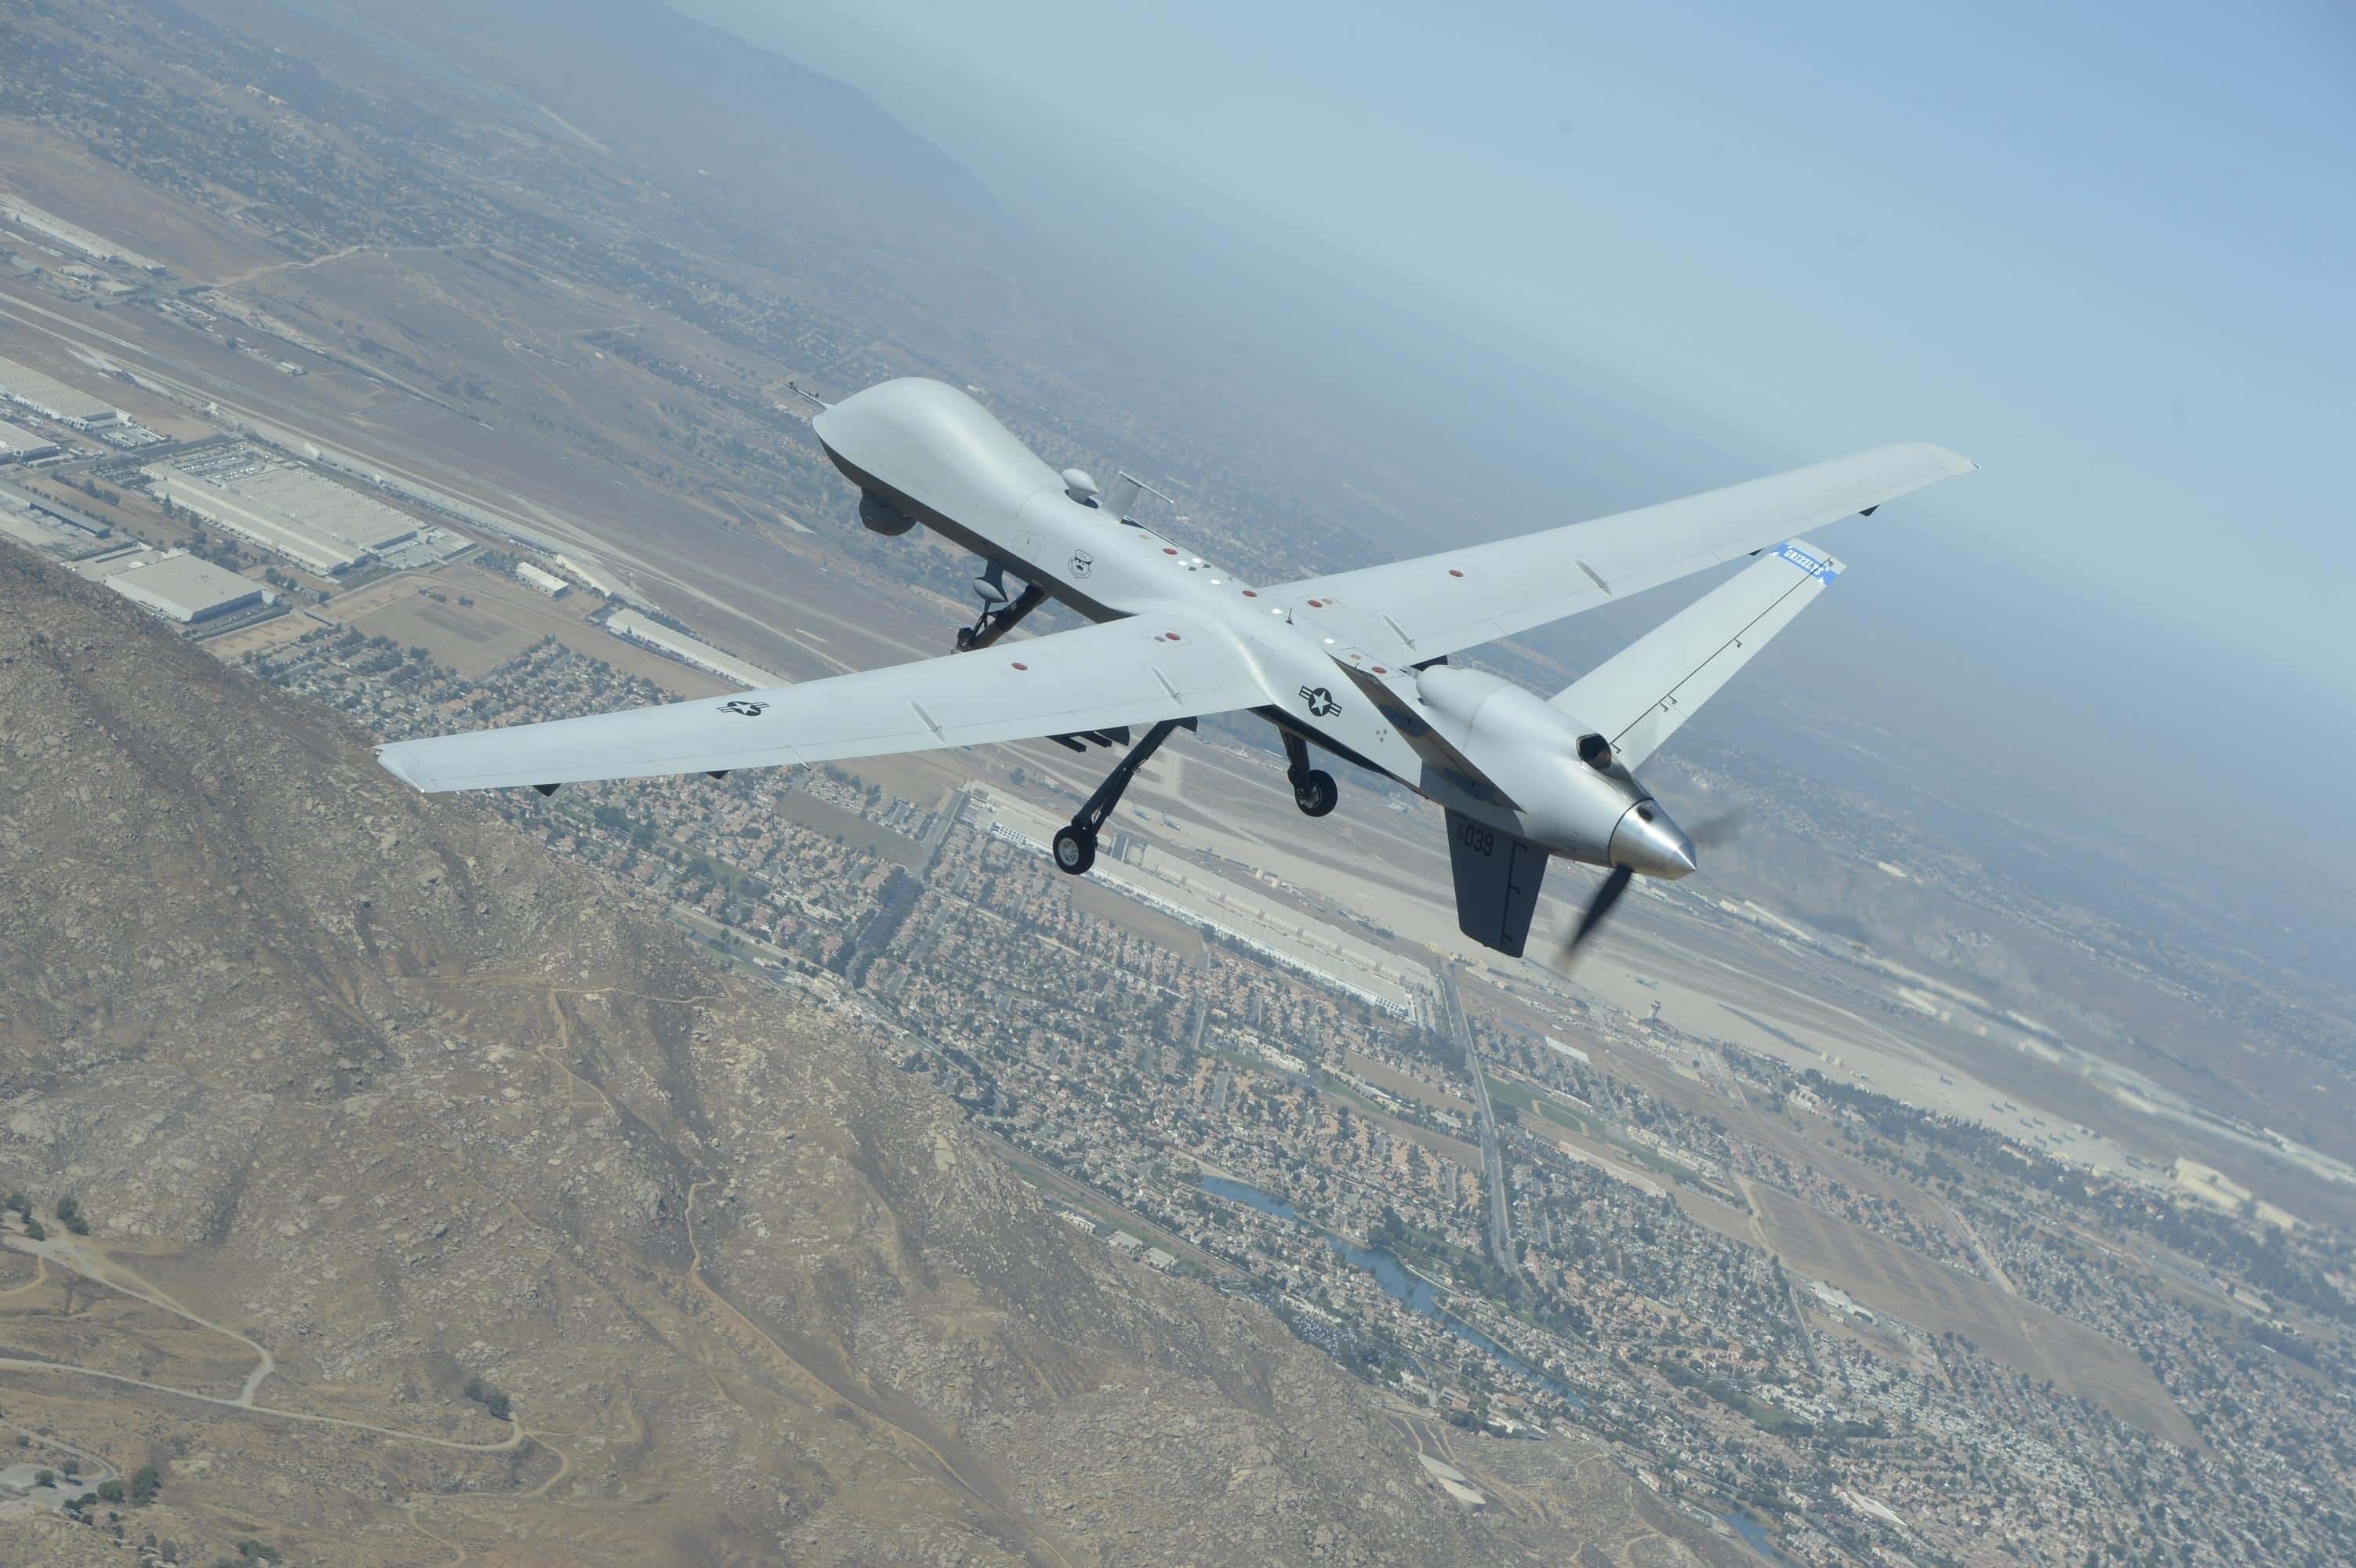 MQ-9 military drone flying through the air and on the airbase